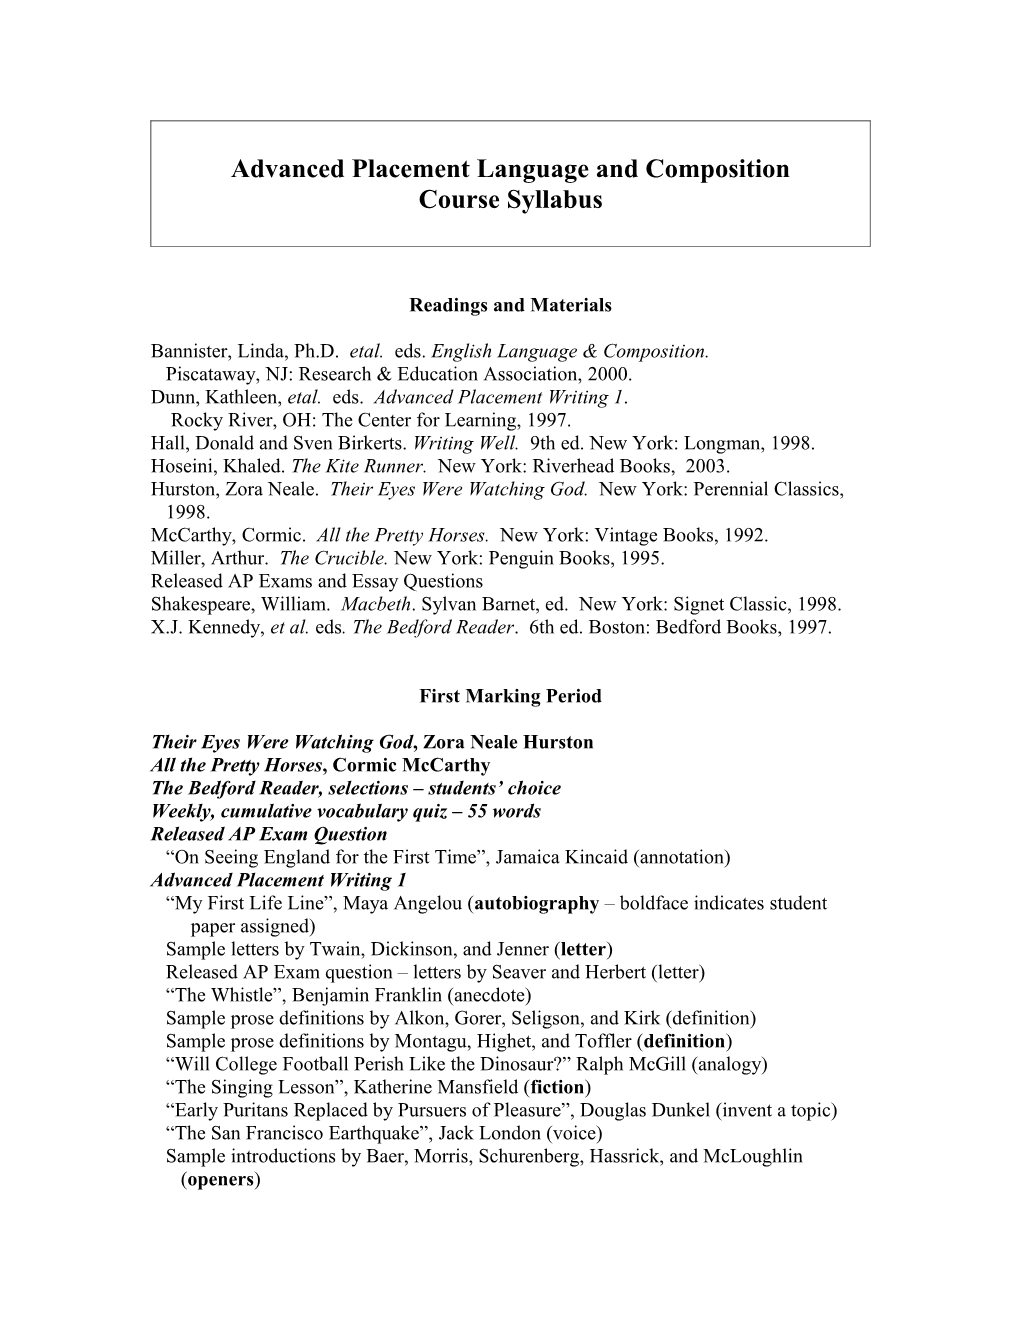 Advanced Placement Language And Composition